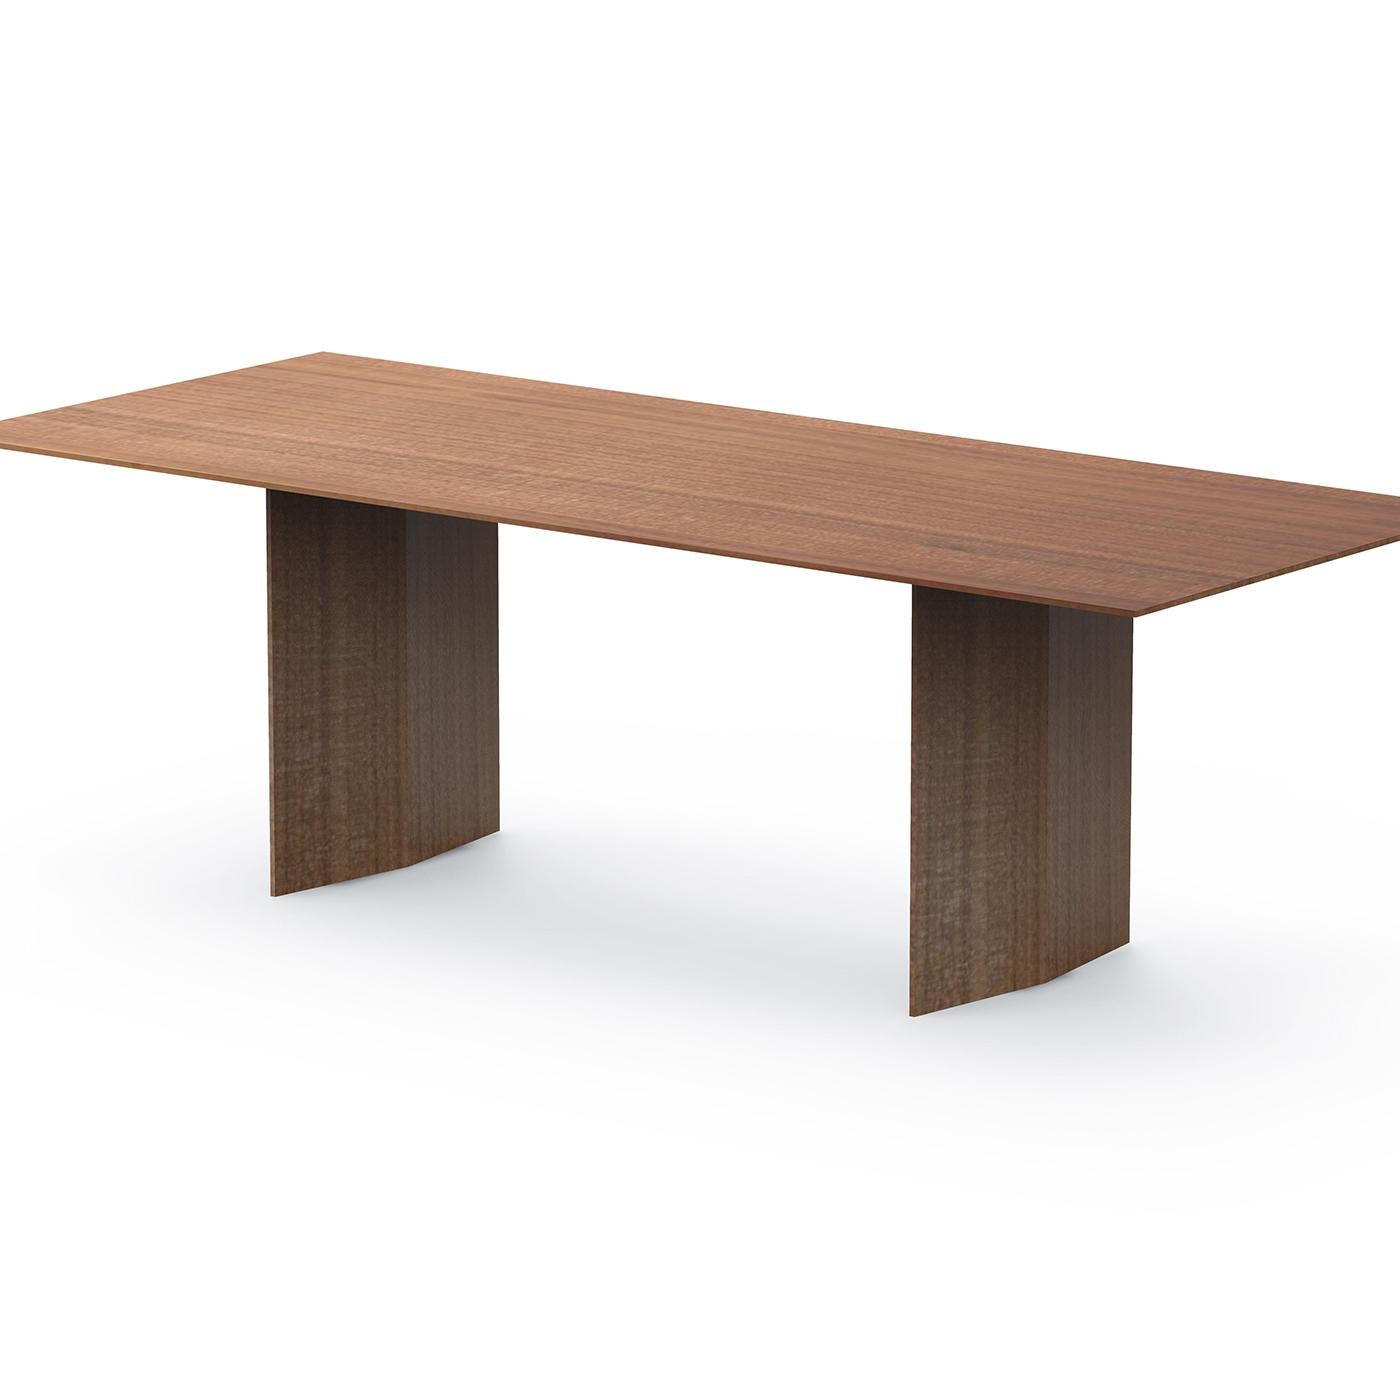 A sophisticated and essential table featuring an extremely simple and linear design. The Praia table is entirely made of veneered multi-layered Canaletto walnut, its height is 75 cm and combines with any type of environment. The rectangular top, in